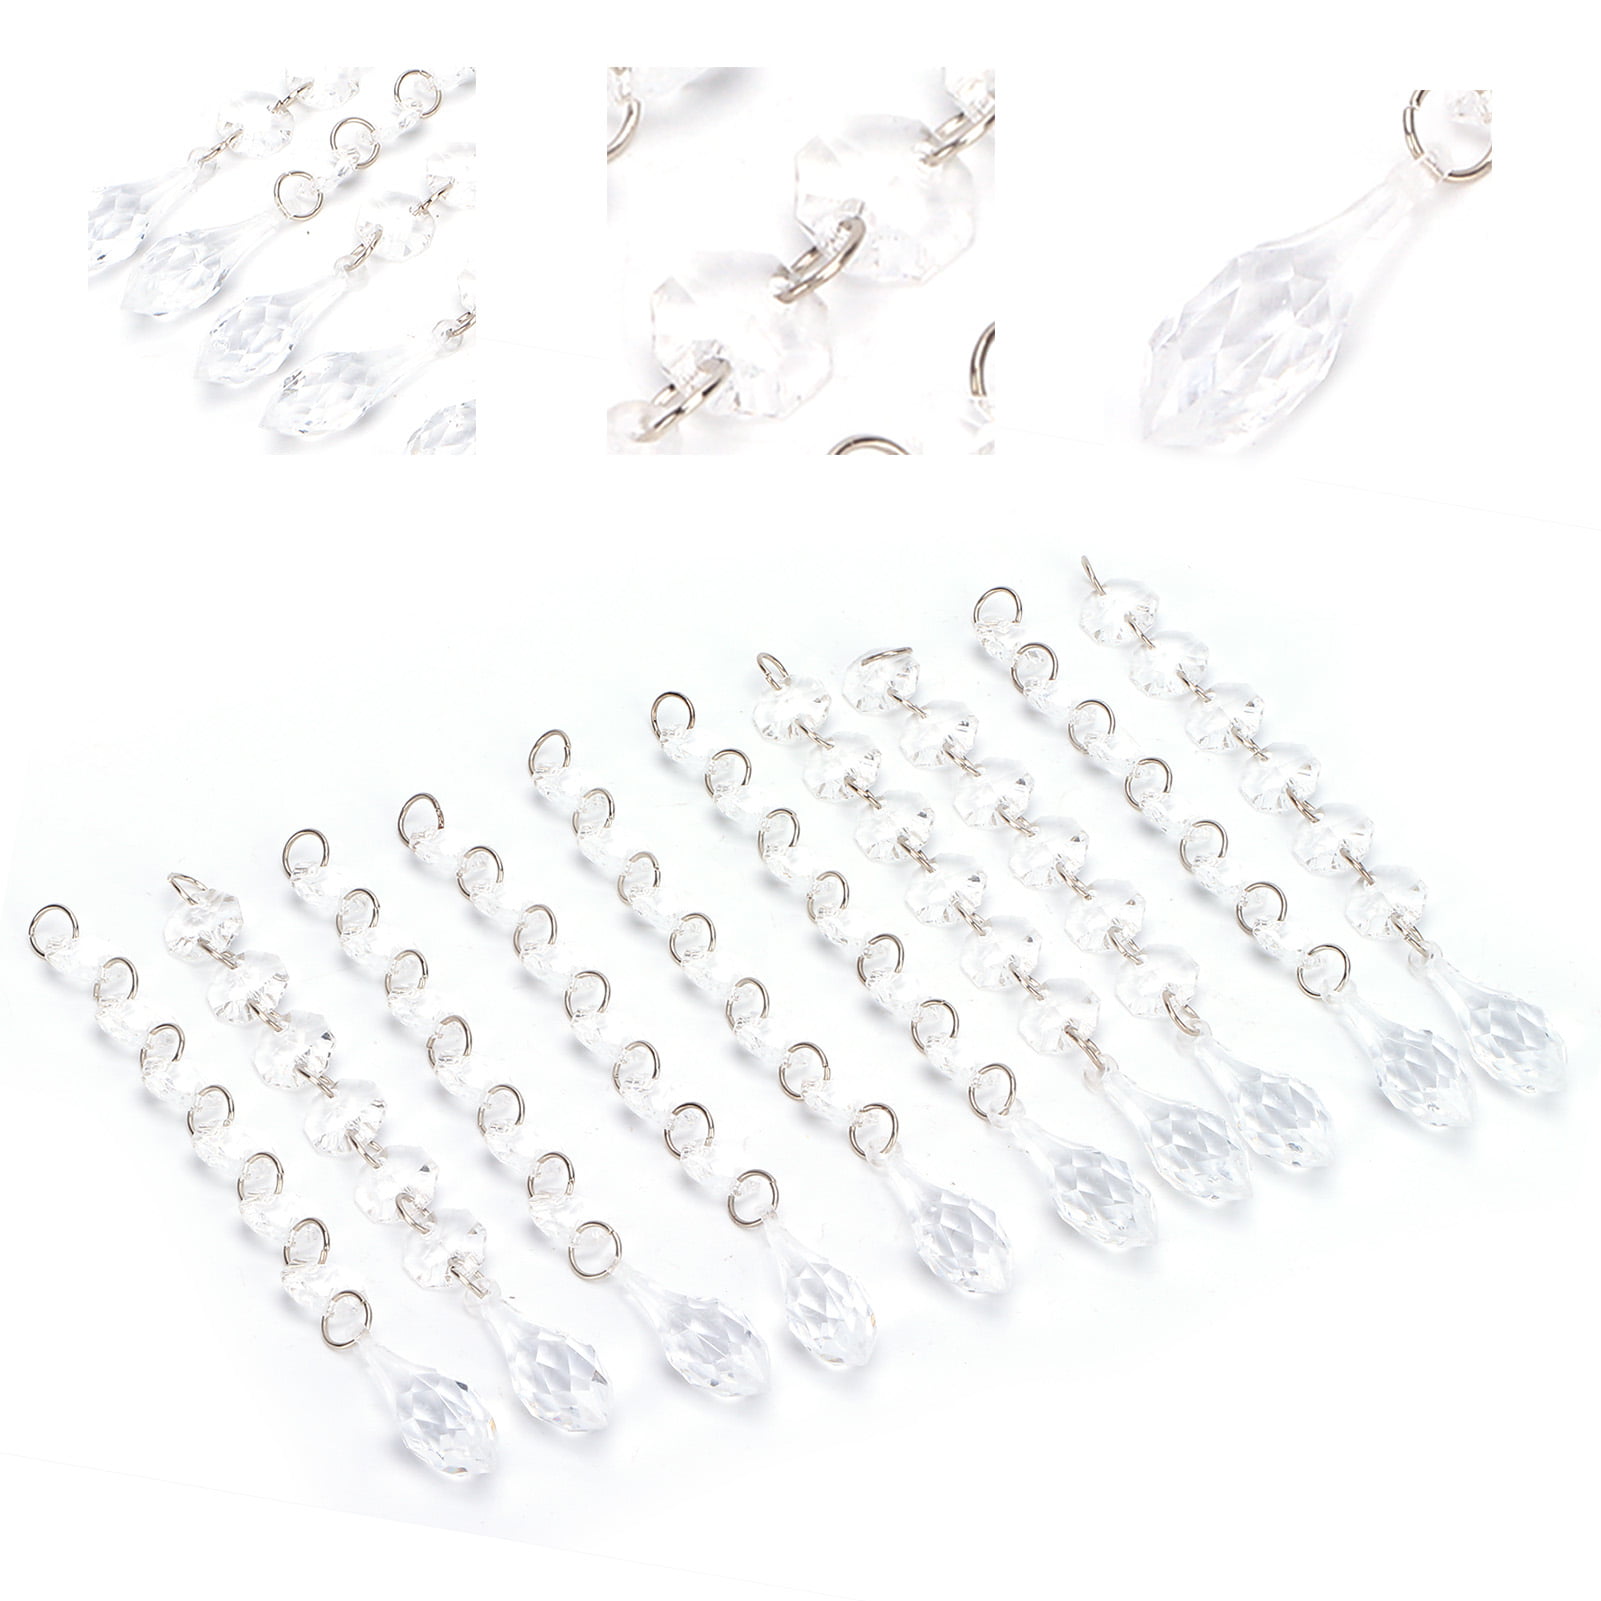 10pcs Clear Teardrop Acrylic Glass Beads Chandelier Hanging Ornaments Home Decor 